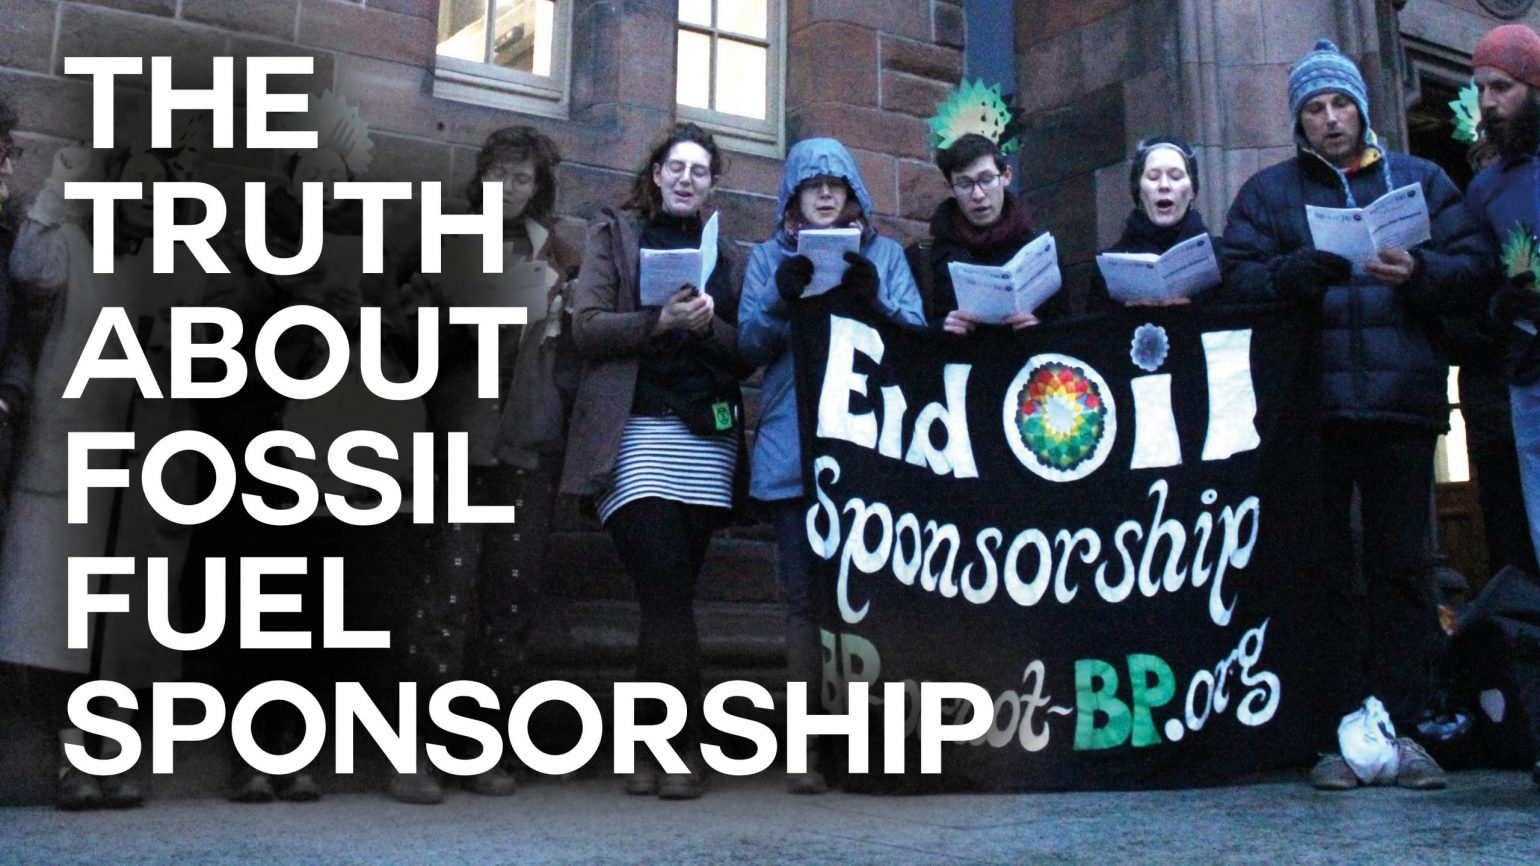 A photo of protesters holding a banner reading "end oil sponsorship". Text is overlaid on the image which reads "the truth about fossil fuel sponsorship"